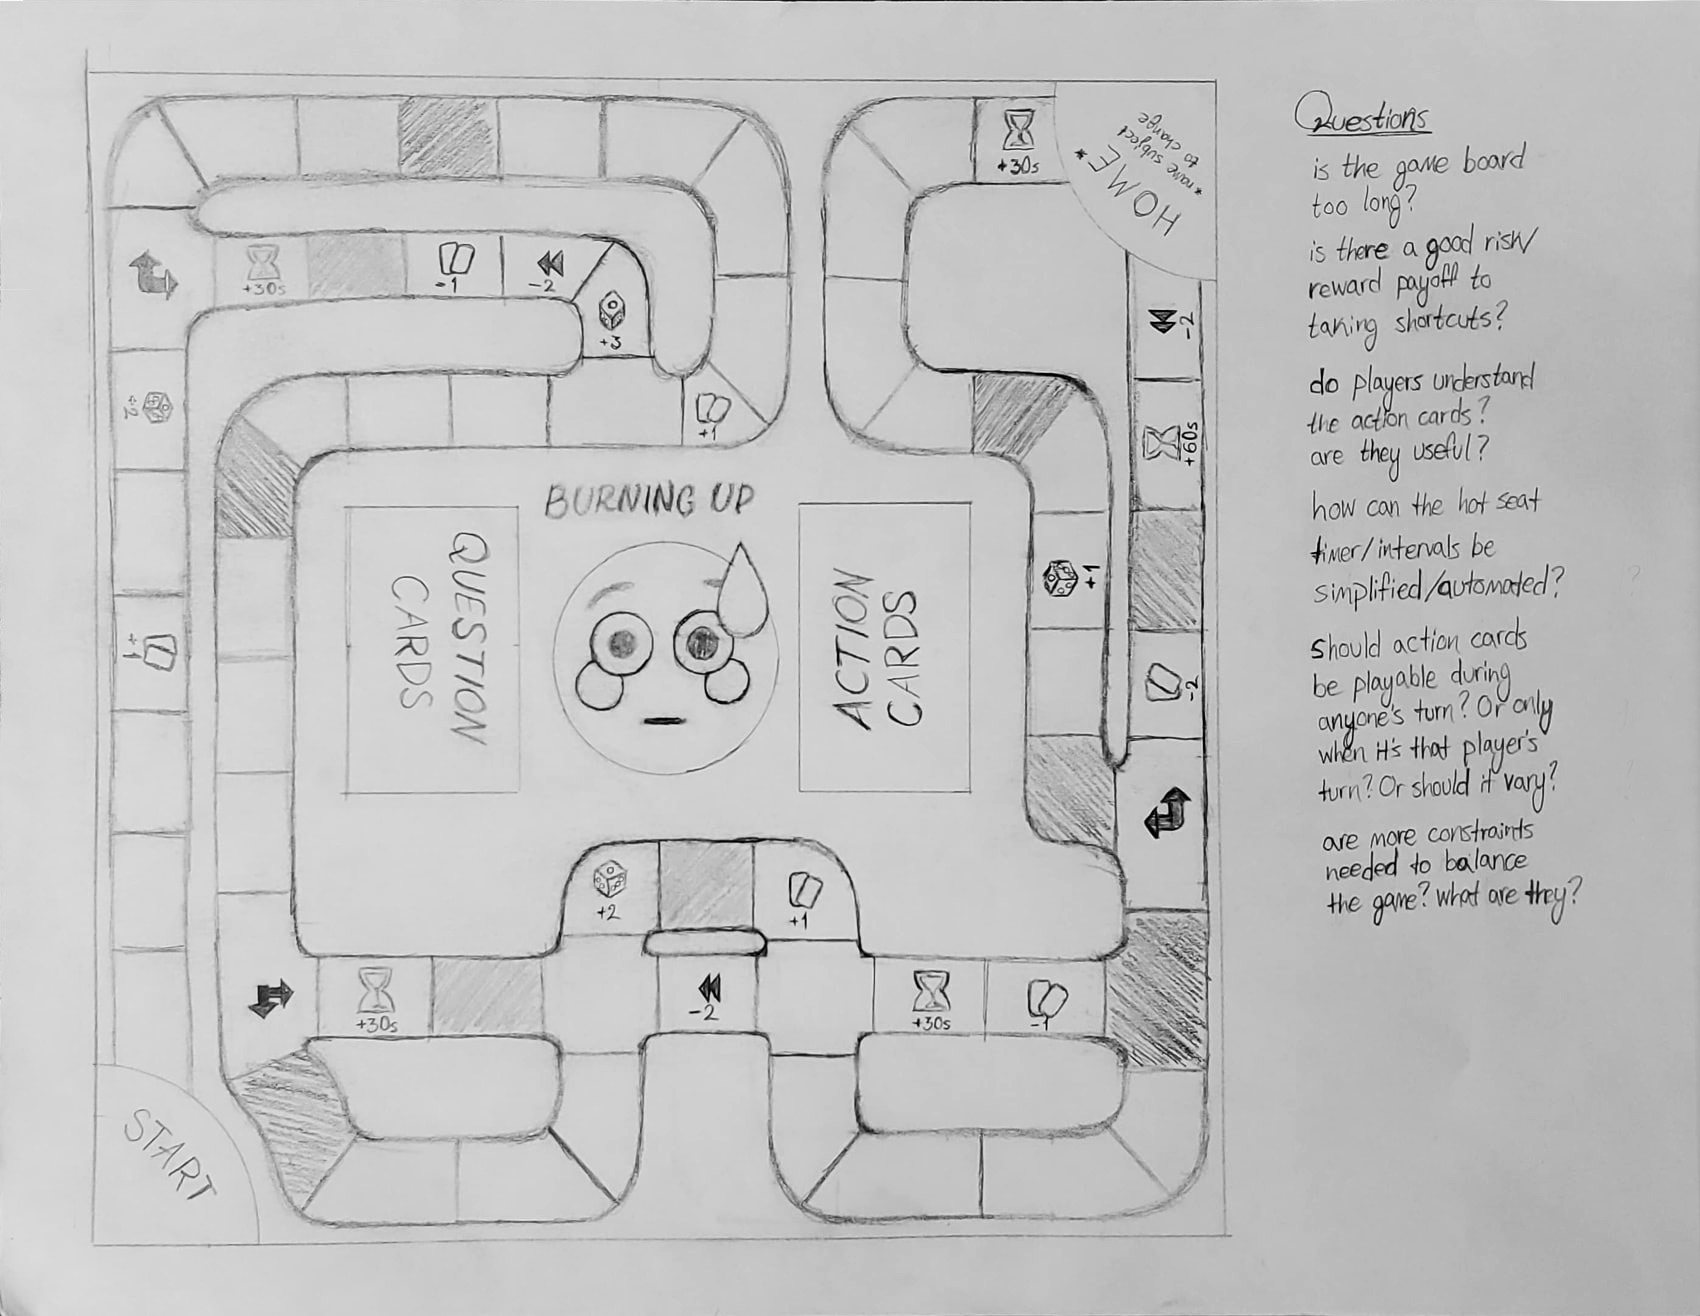 Paper prototype game board